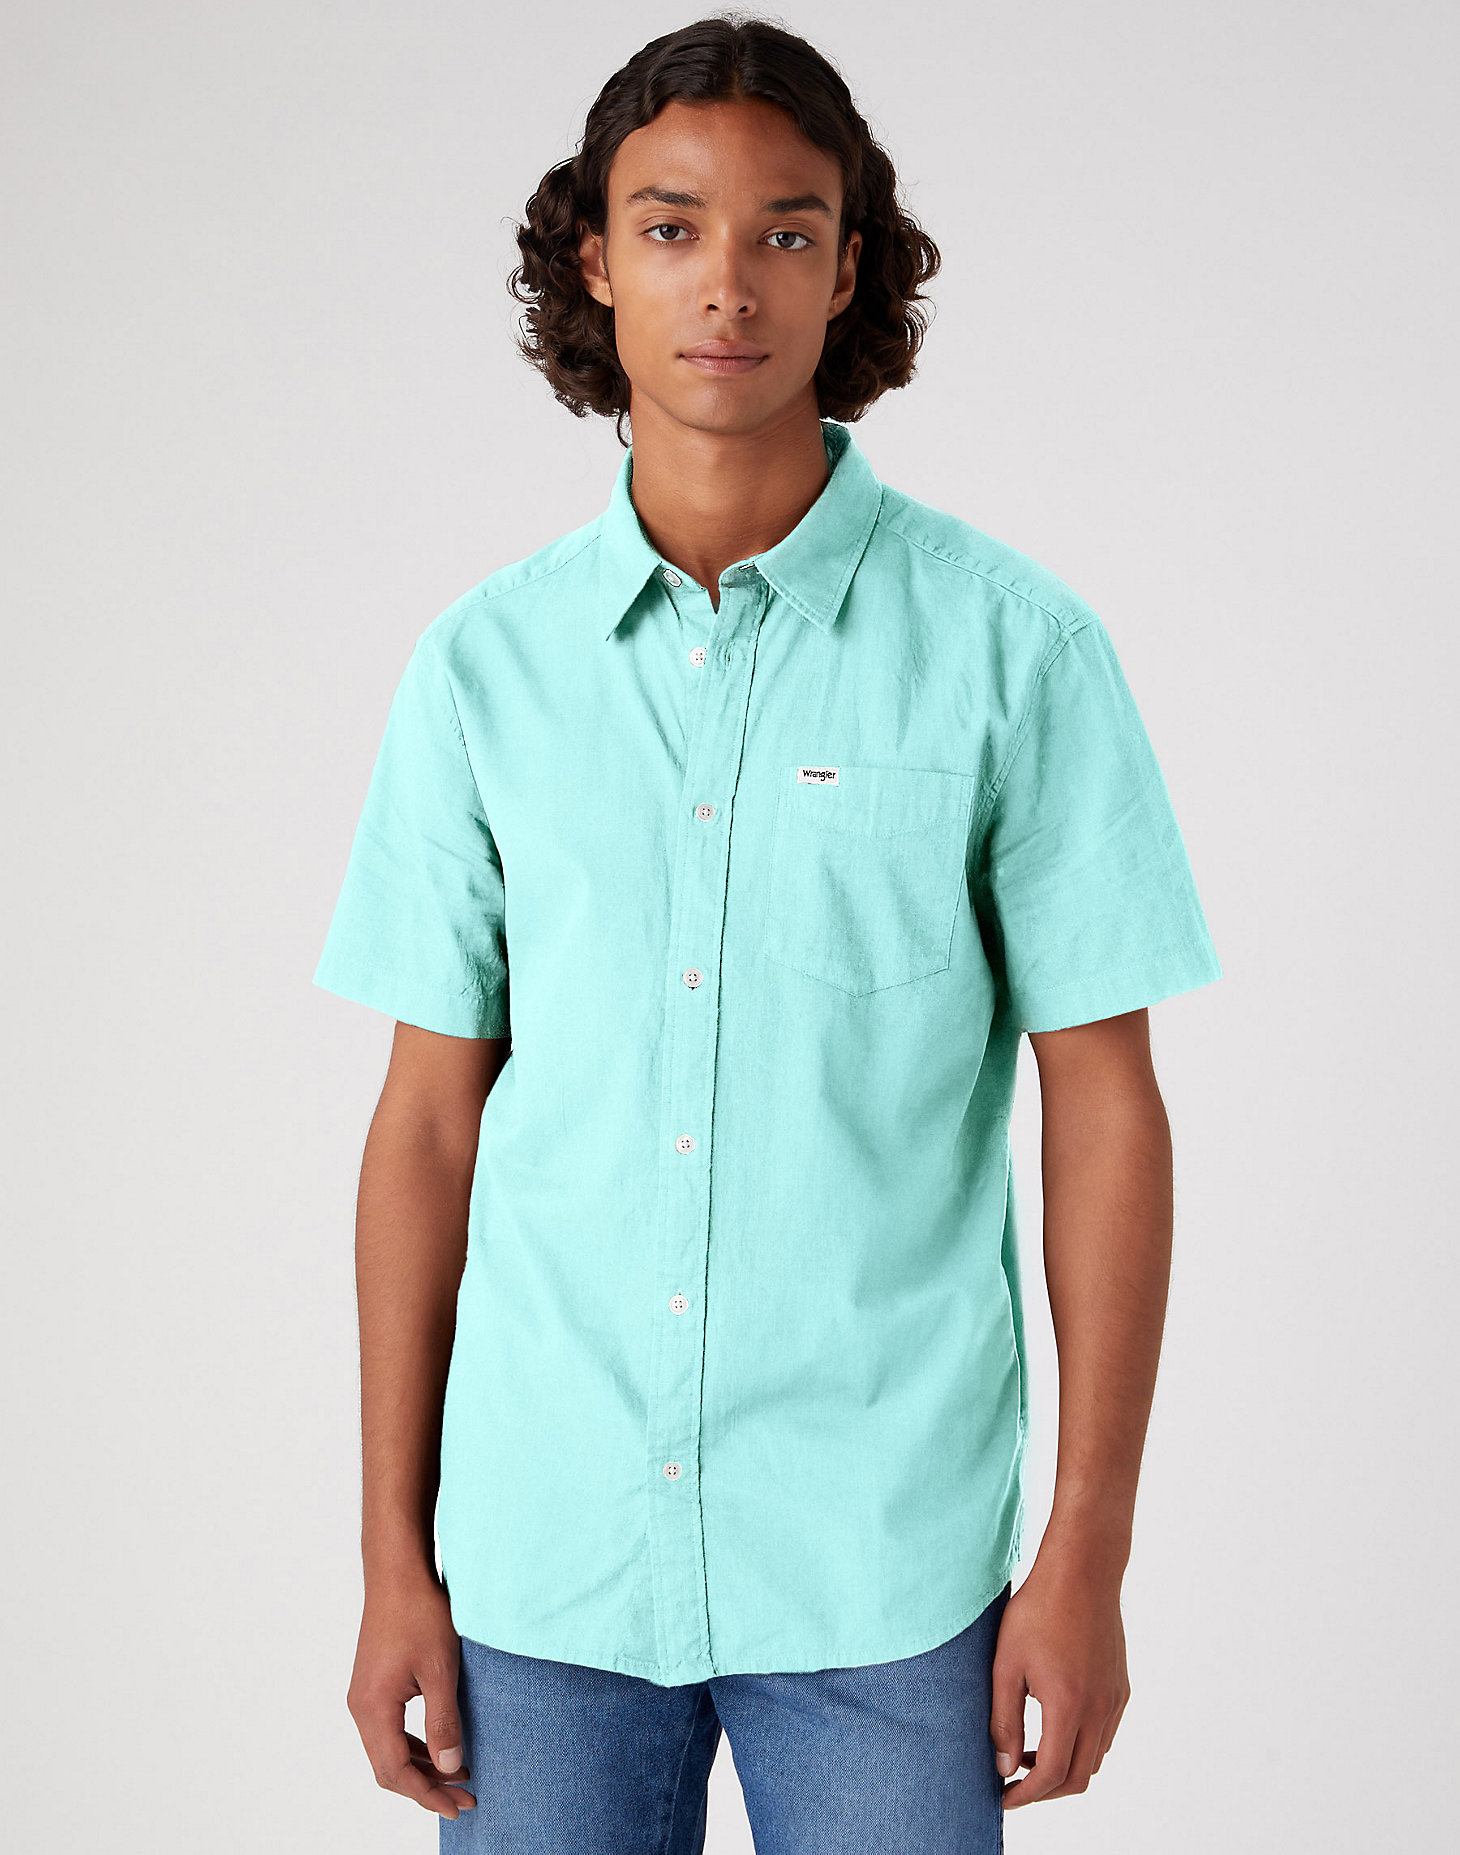 Short Sleeve 1 Pocket Shirt in Canal Blue main view